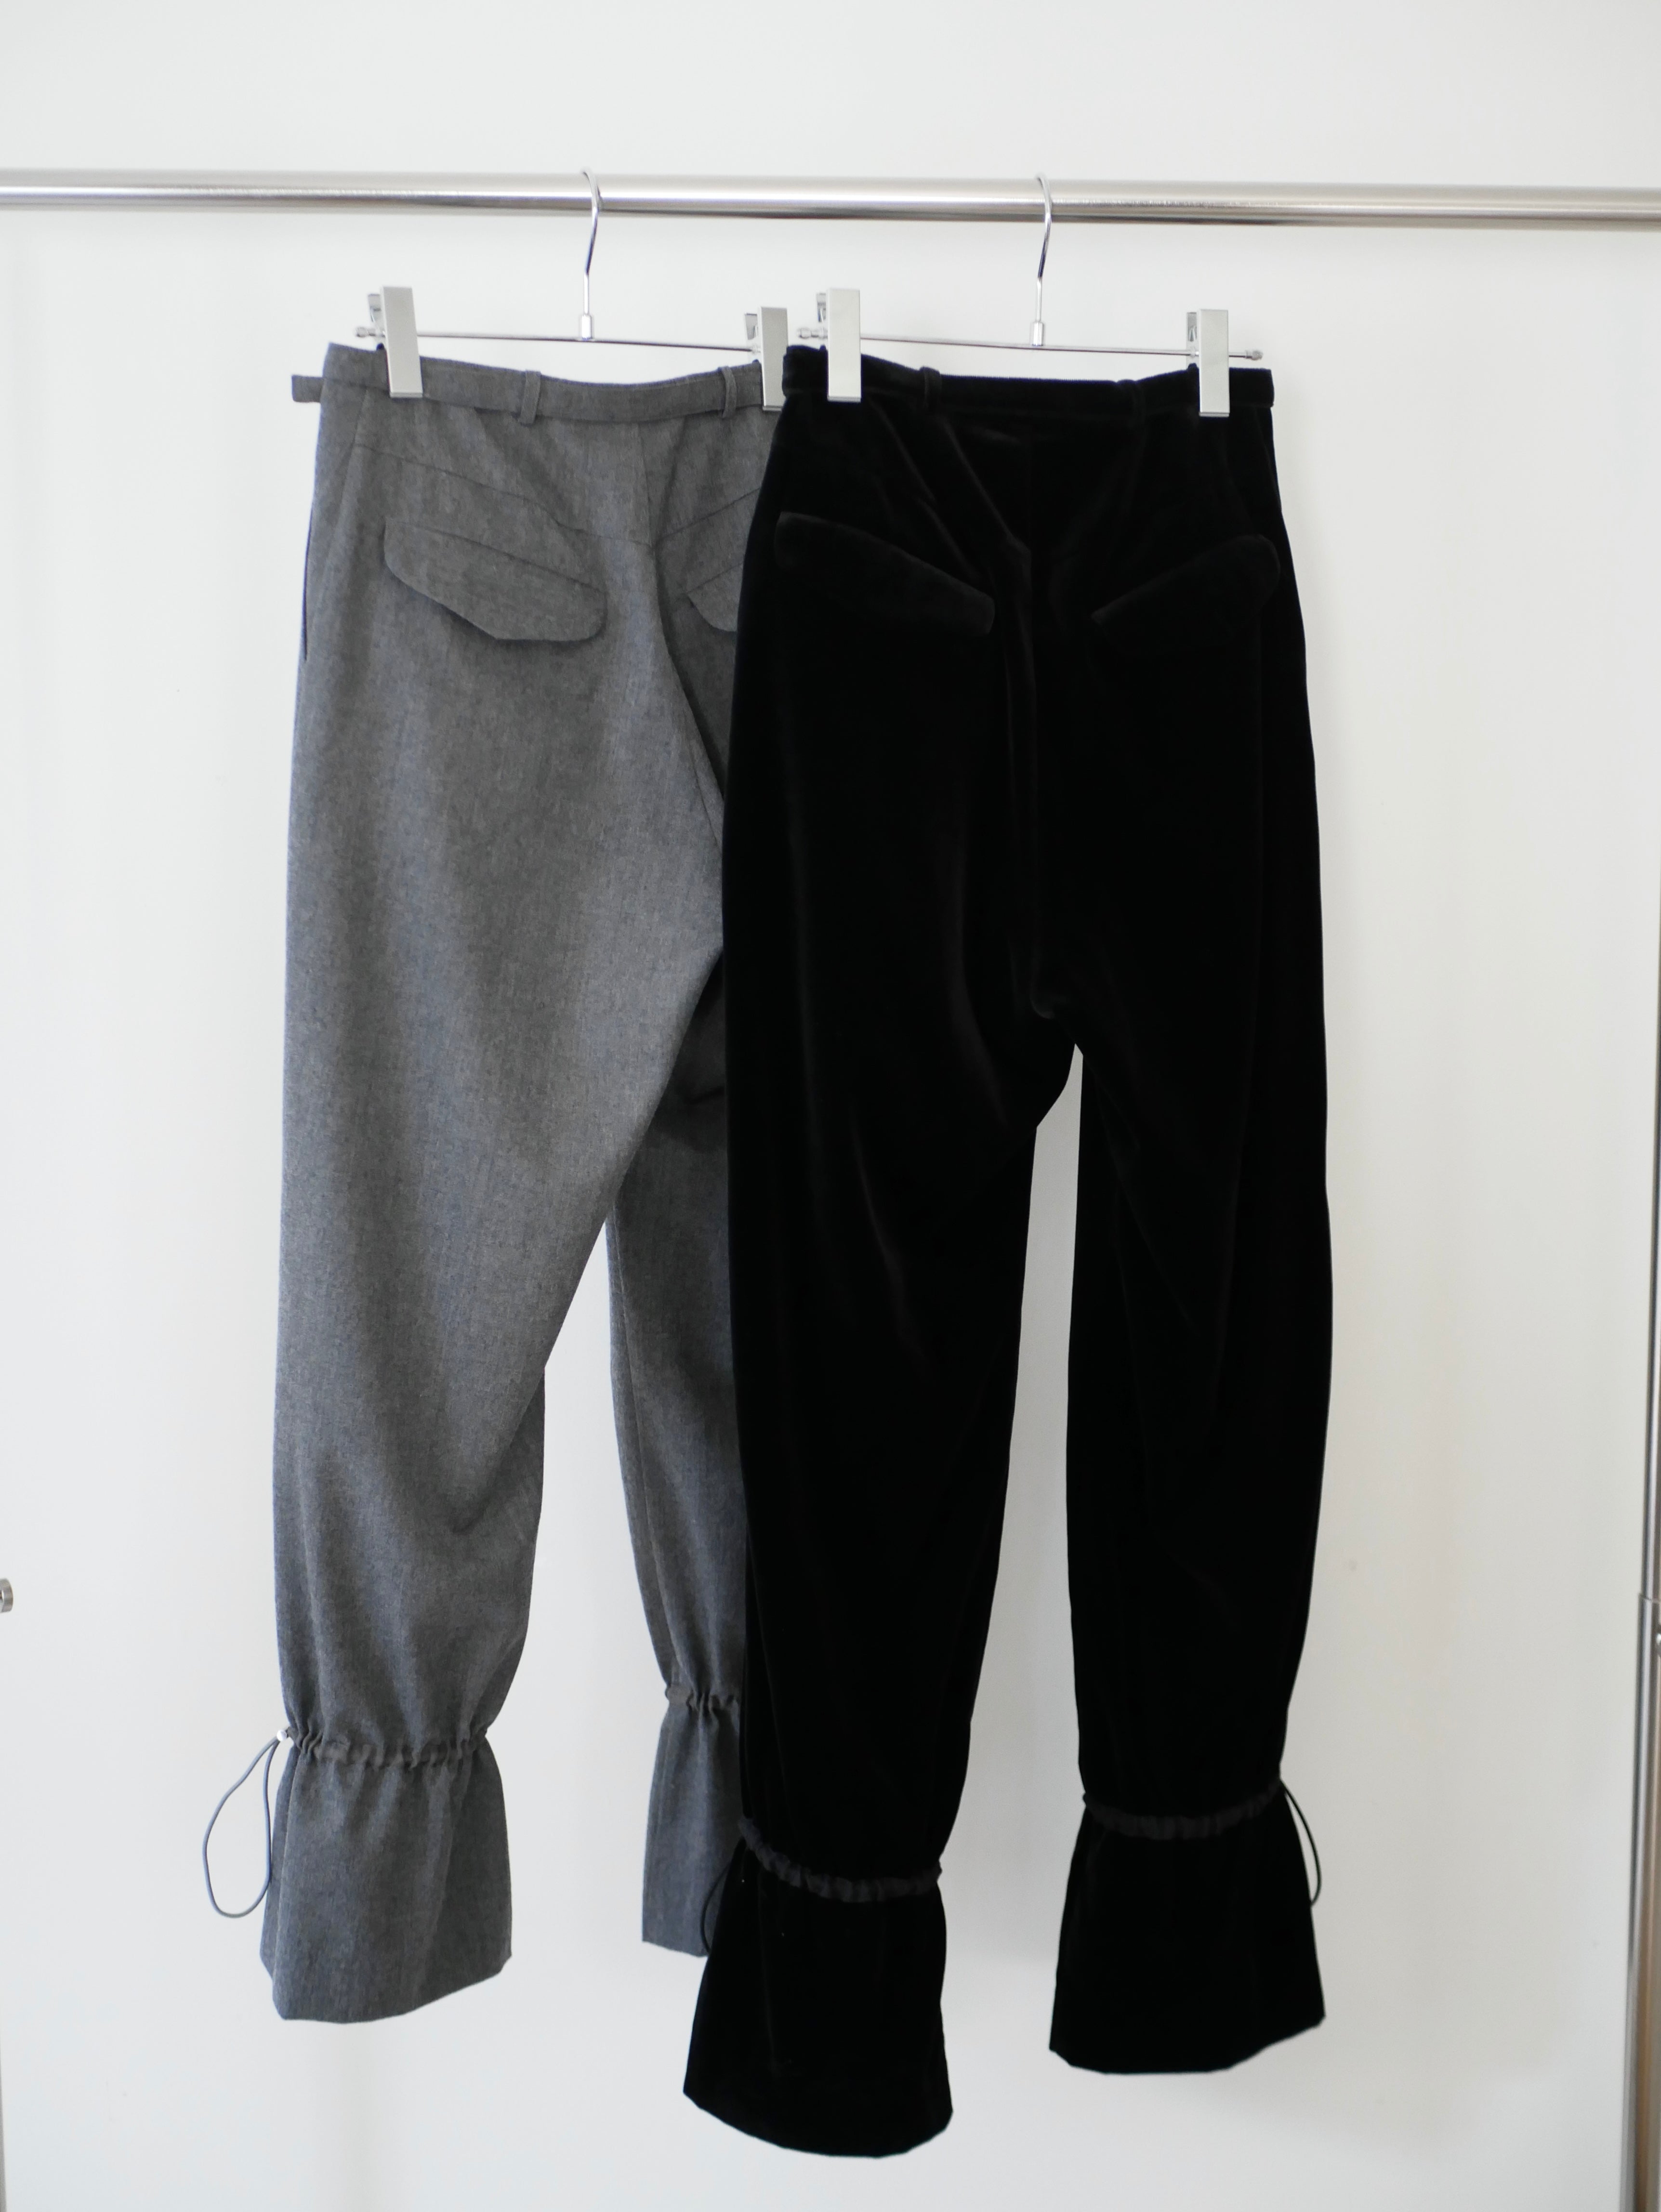 rich〕 Silver hook & shirring pants 【Last one Gray size1 